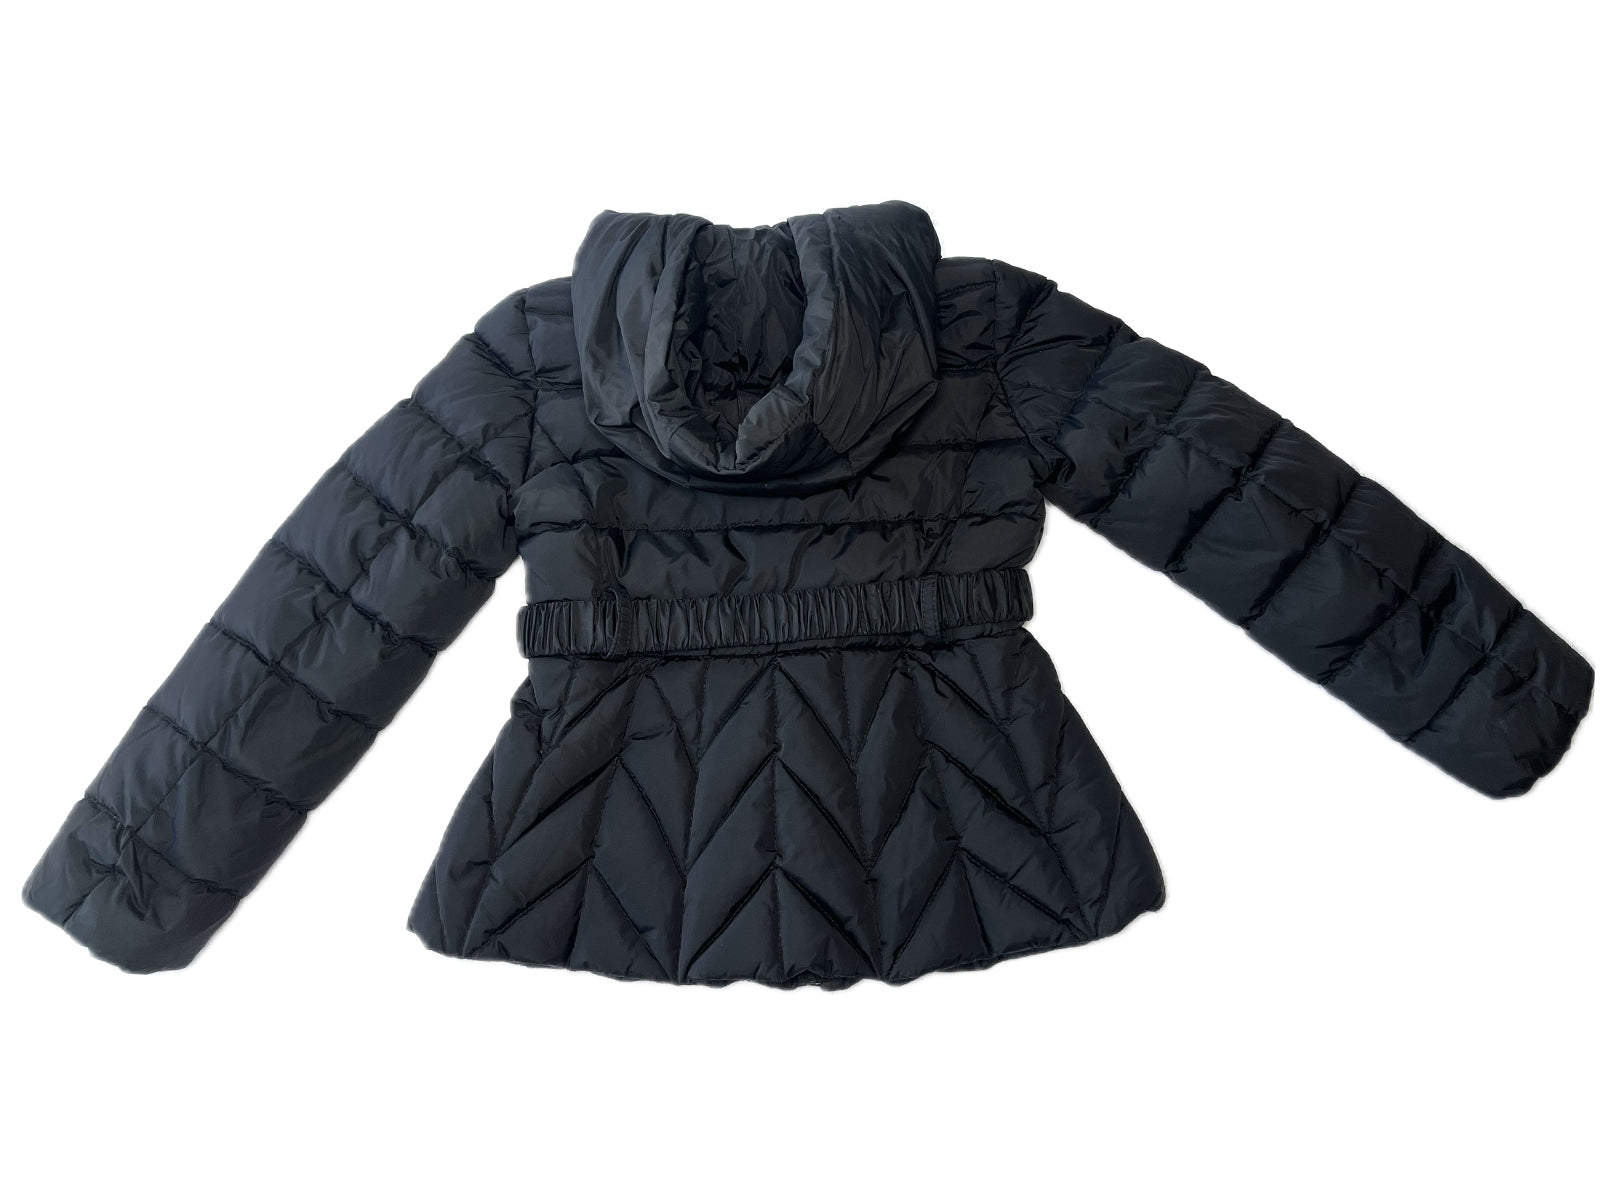 Black Moncler jacket with hood and waist belt and pockets.